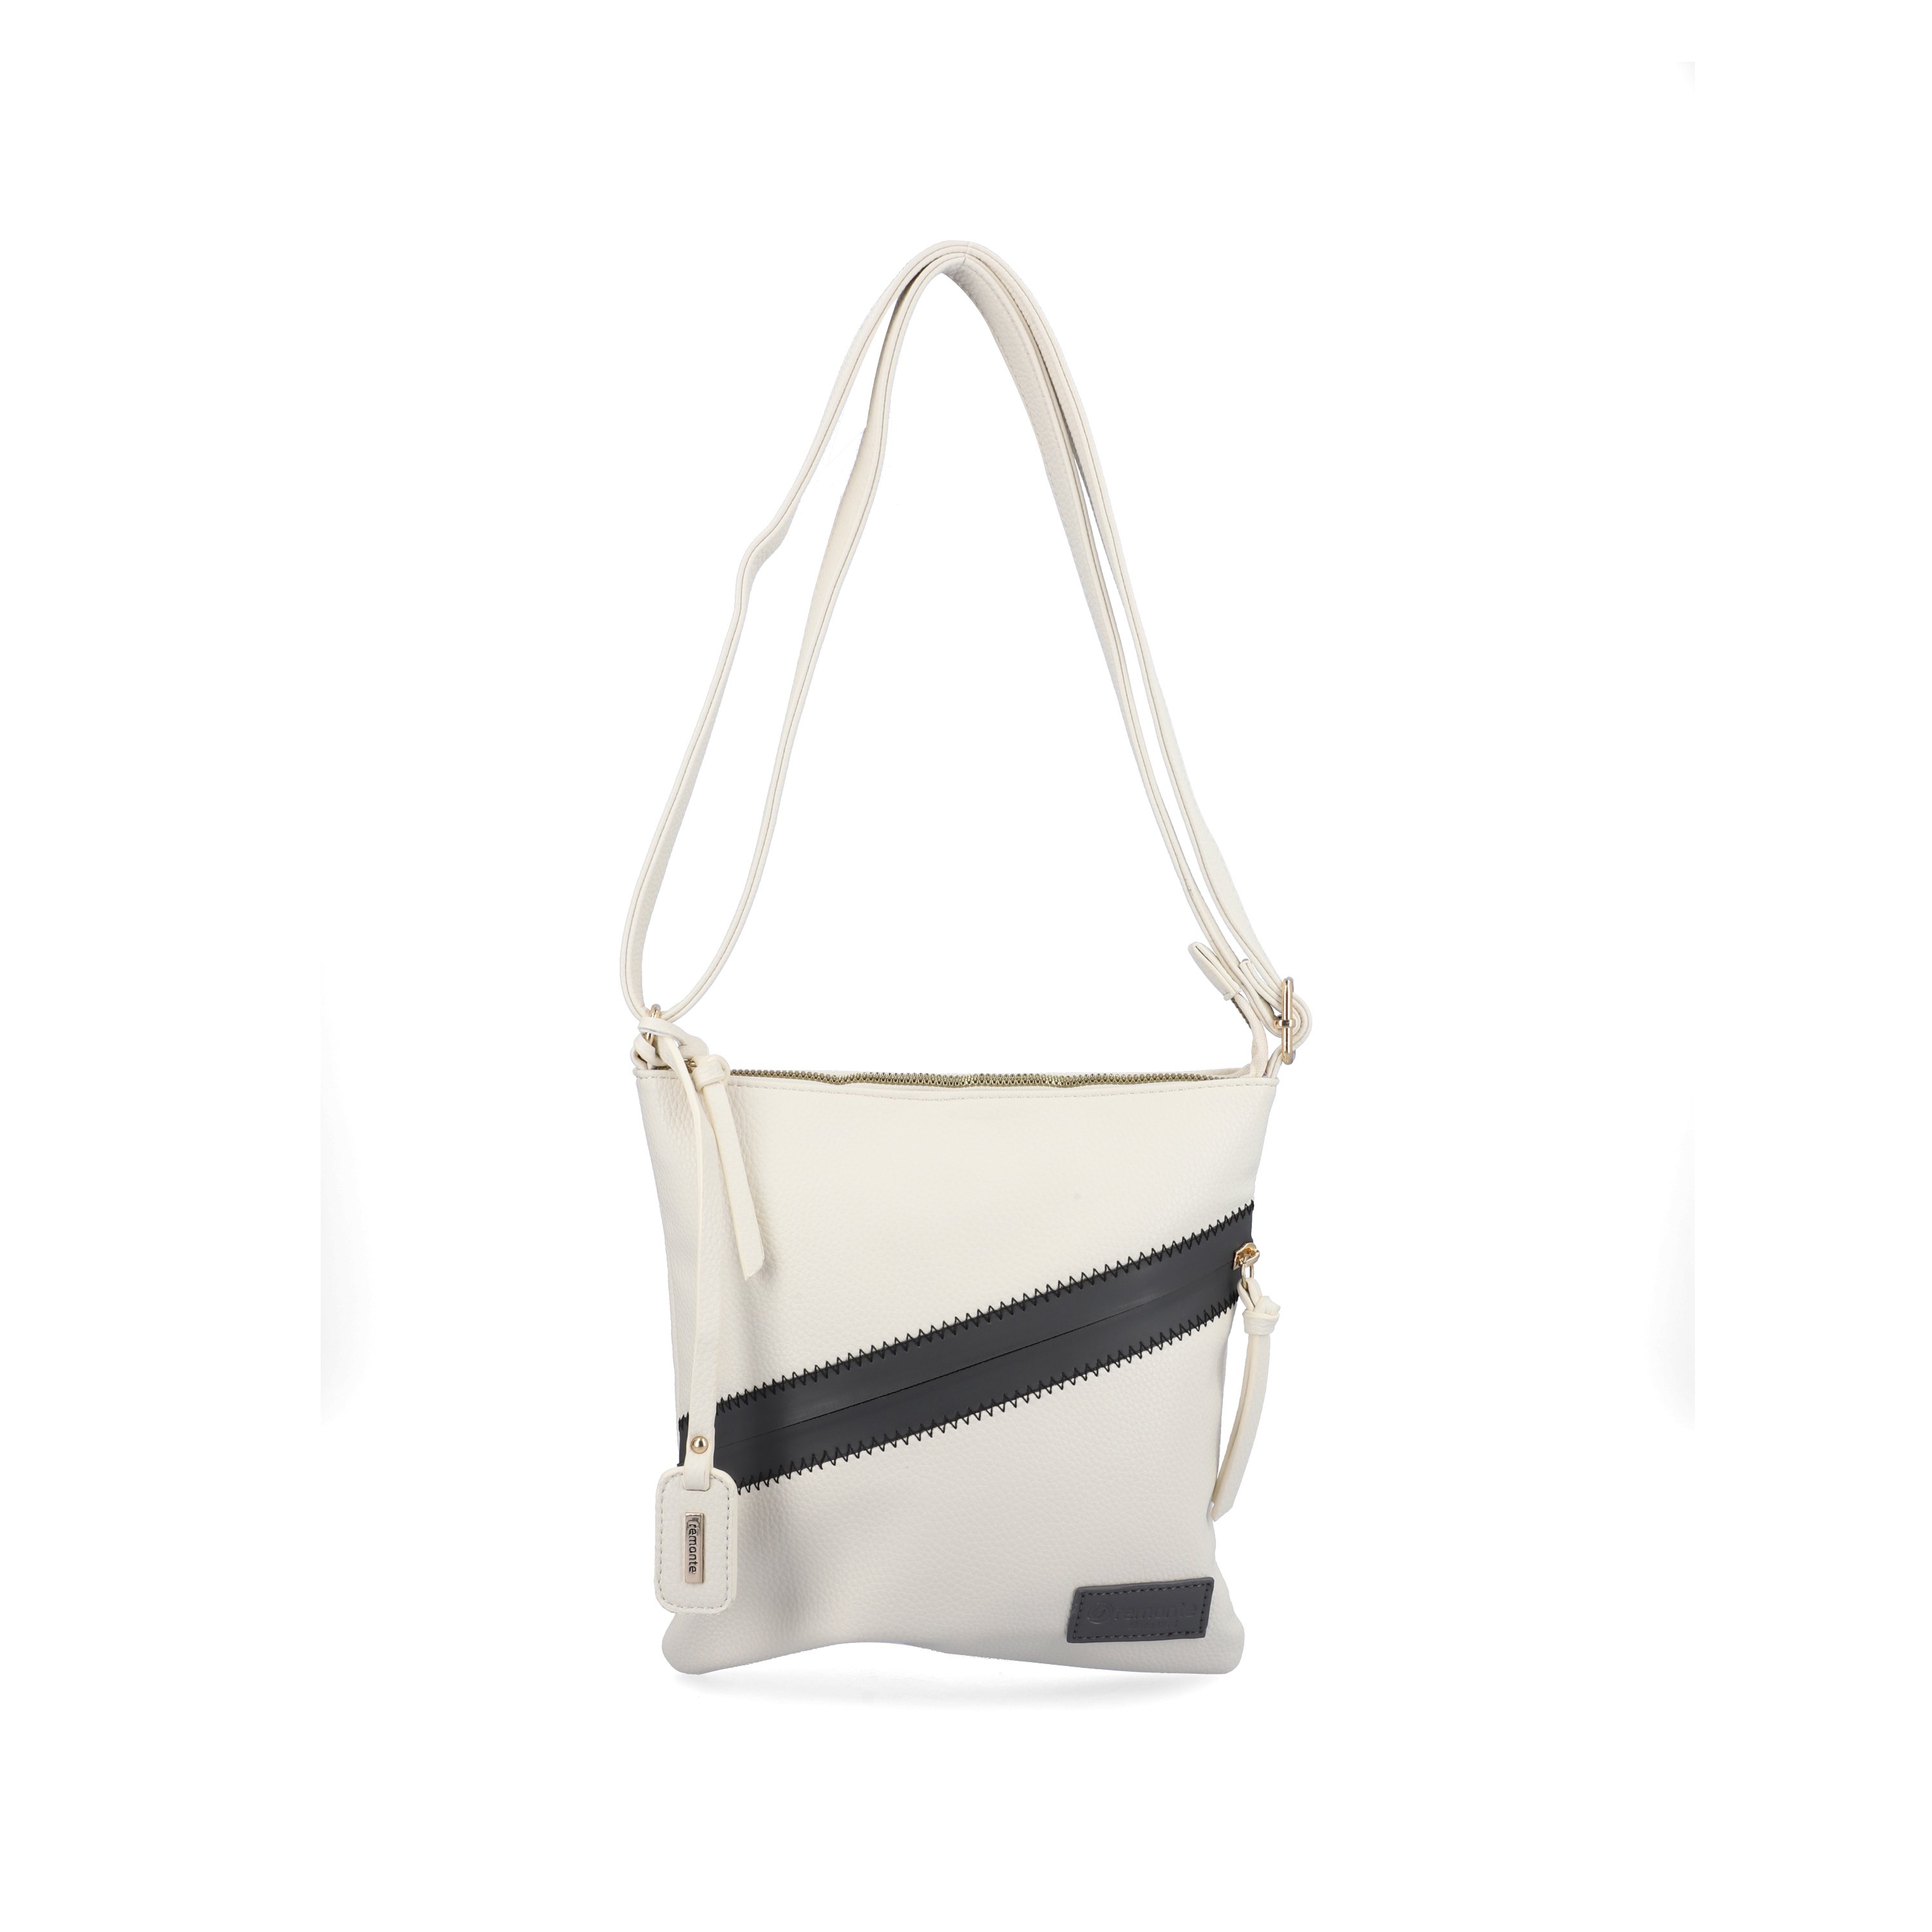 remonte women´s bag Q0625-60 in beige made of imitation leather with zipper from the front.